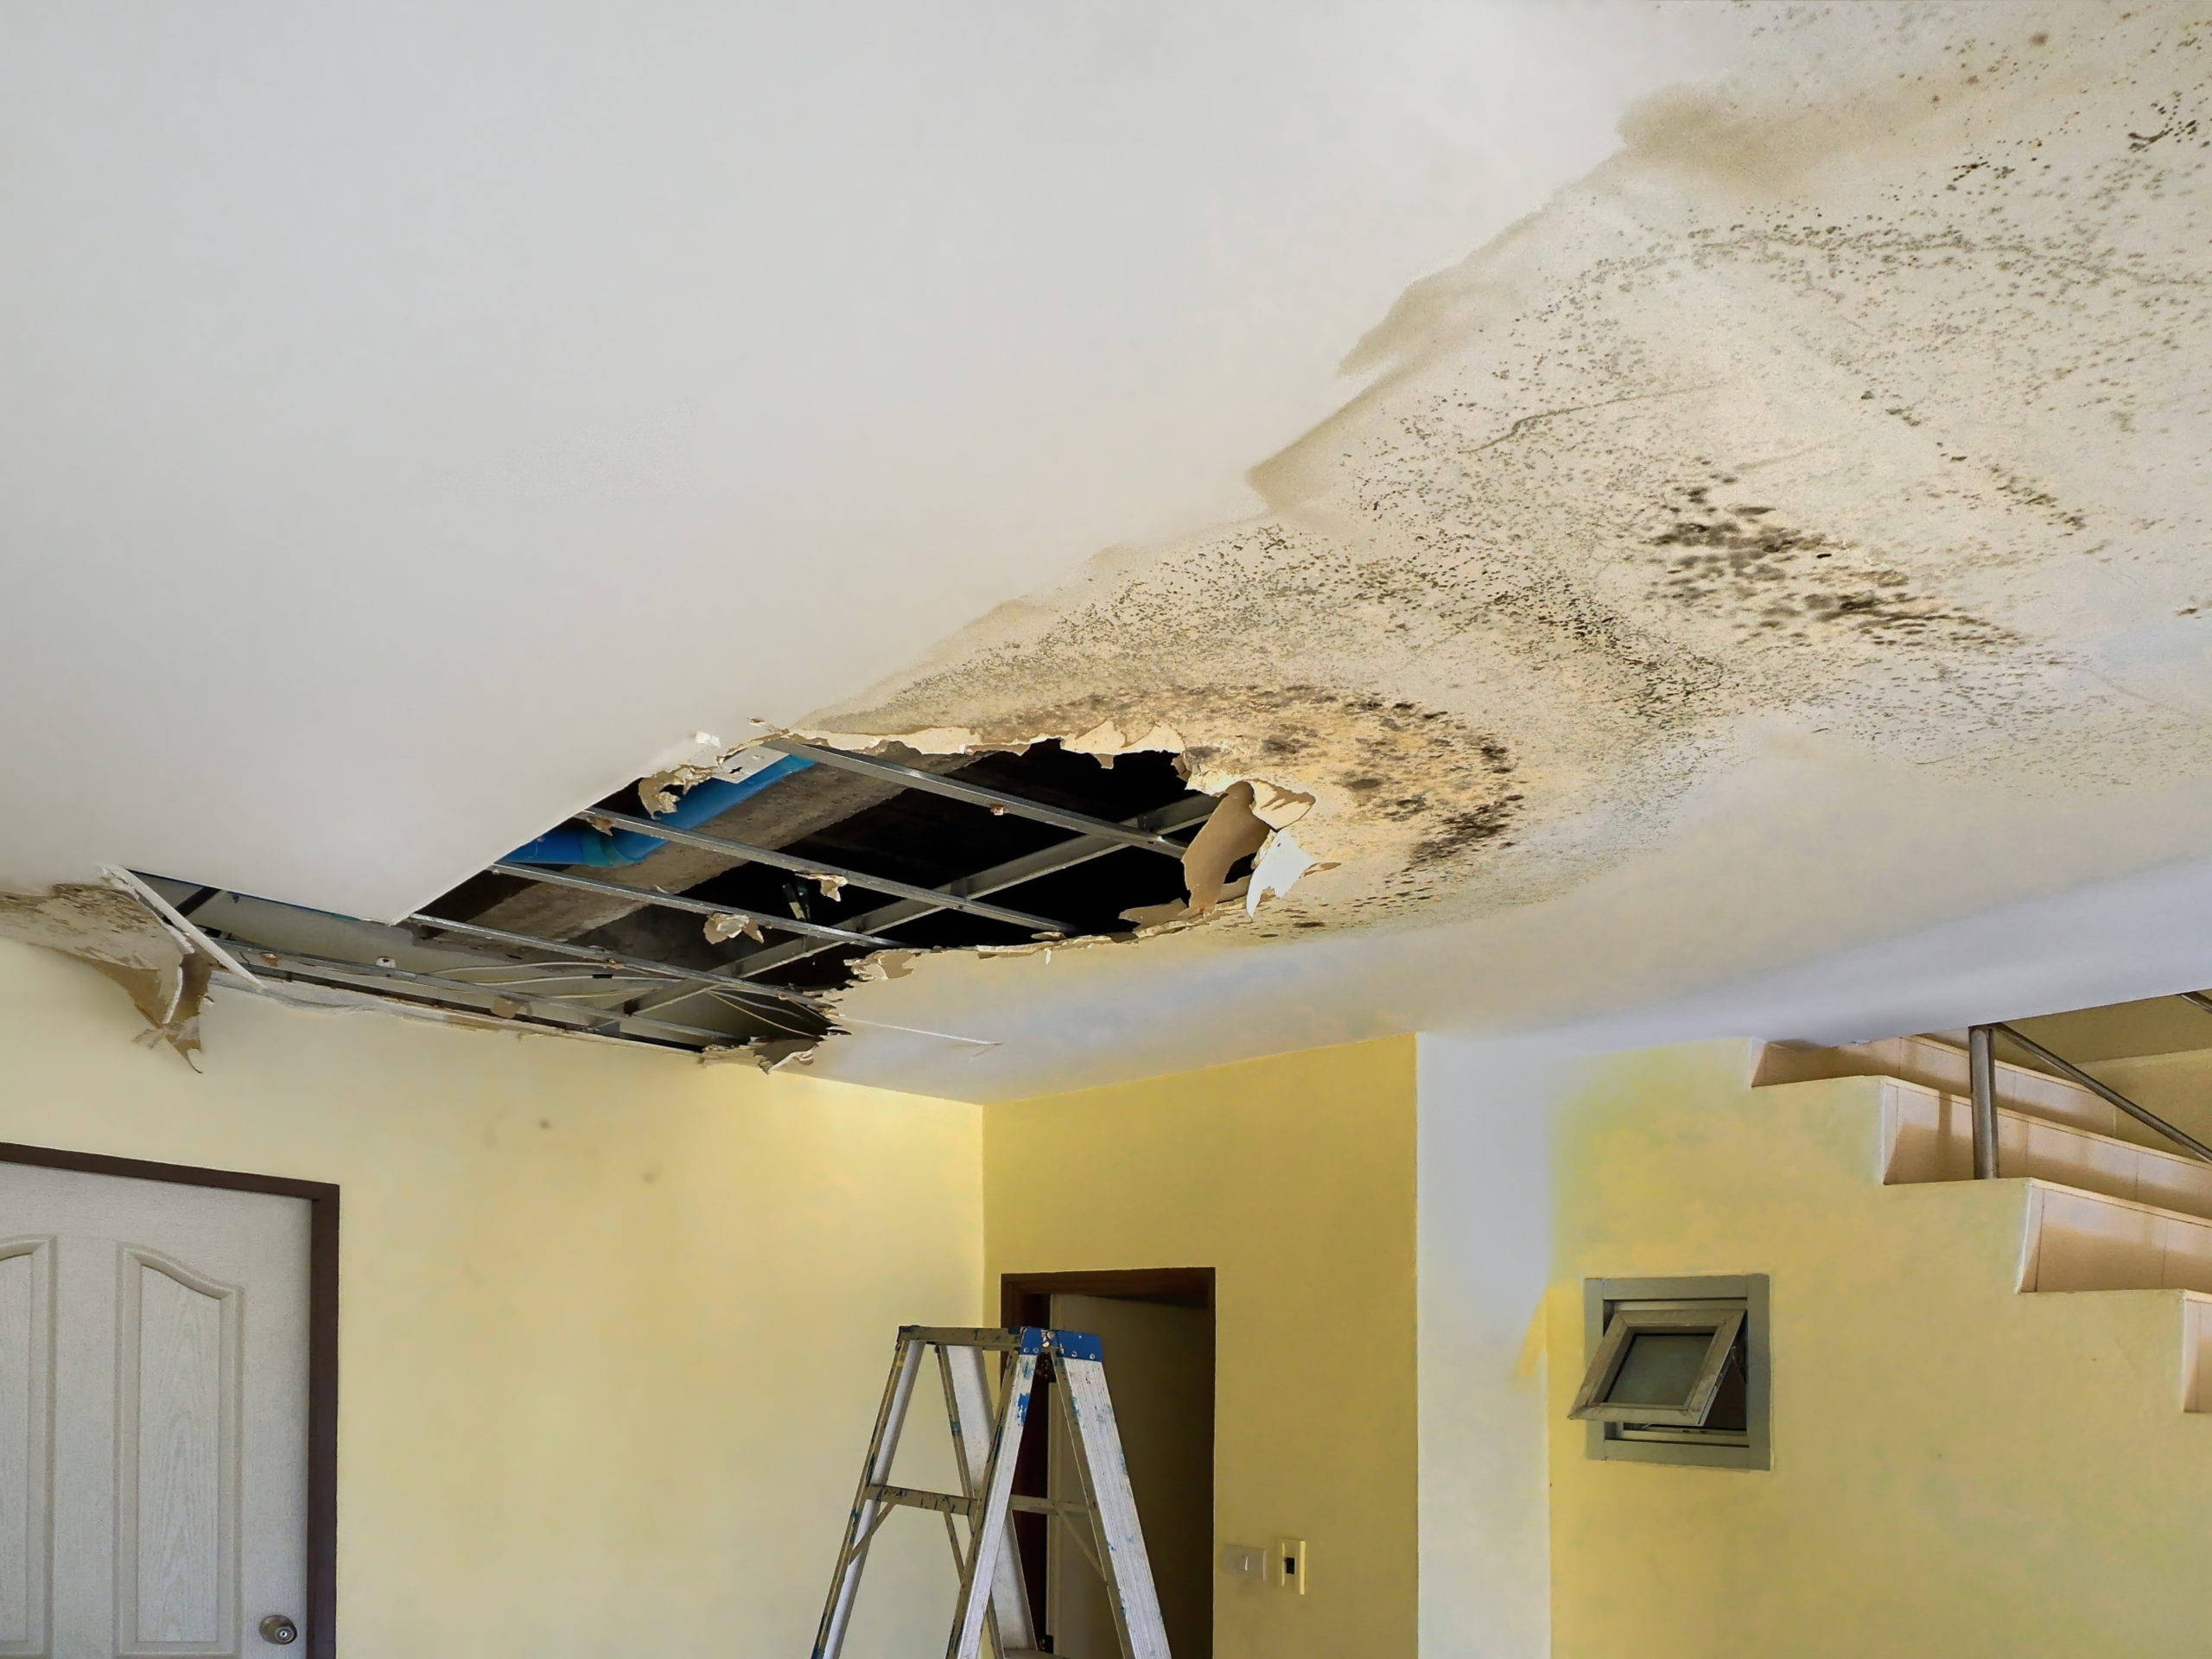 An image of the inside of a home, where a ladder is positioned beneath a heavily damaged the ceiling because of a leaking roof.